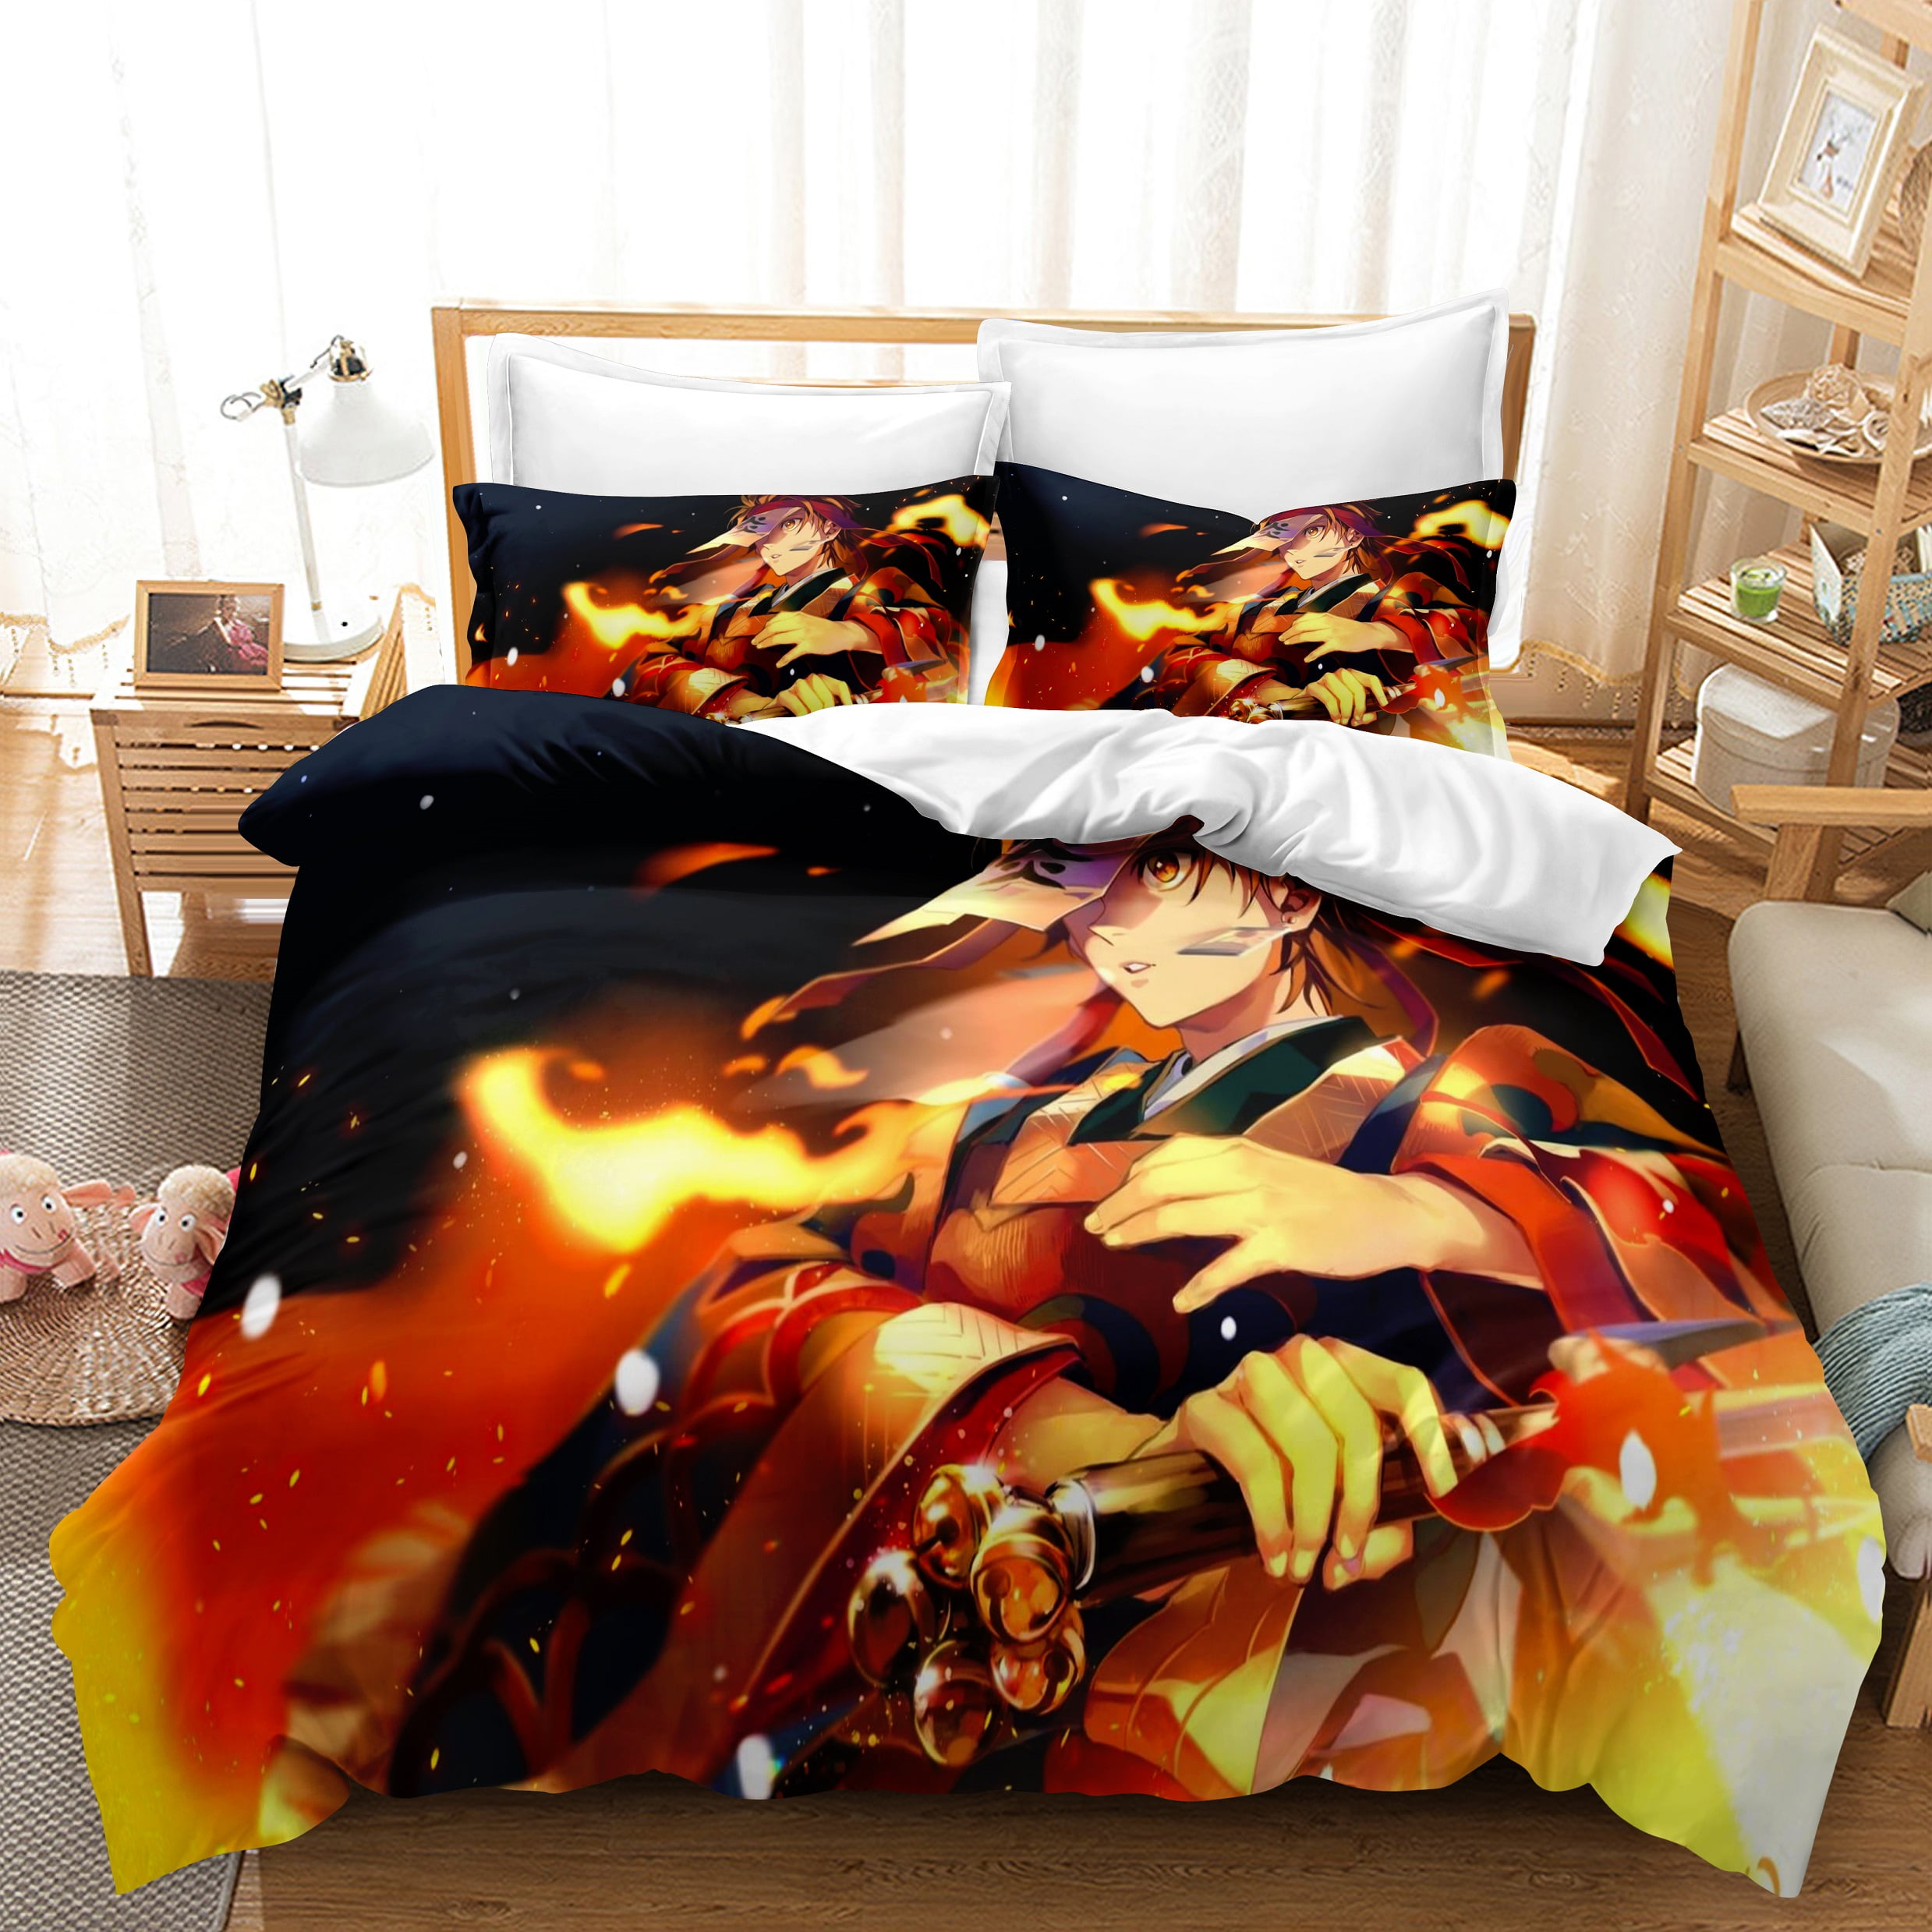 3D Effect Duvet Quilt Cover Bedding Sets with Pillow 2 Cases Fitted Sheet 